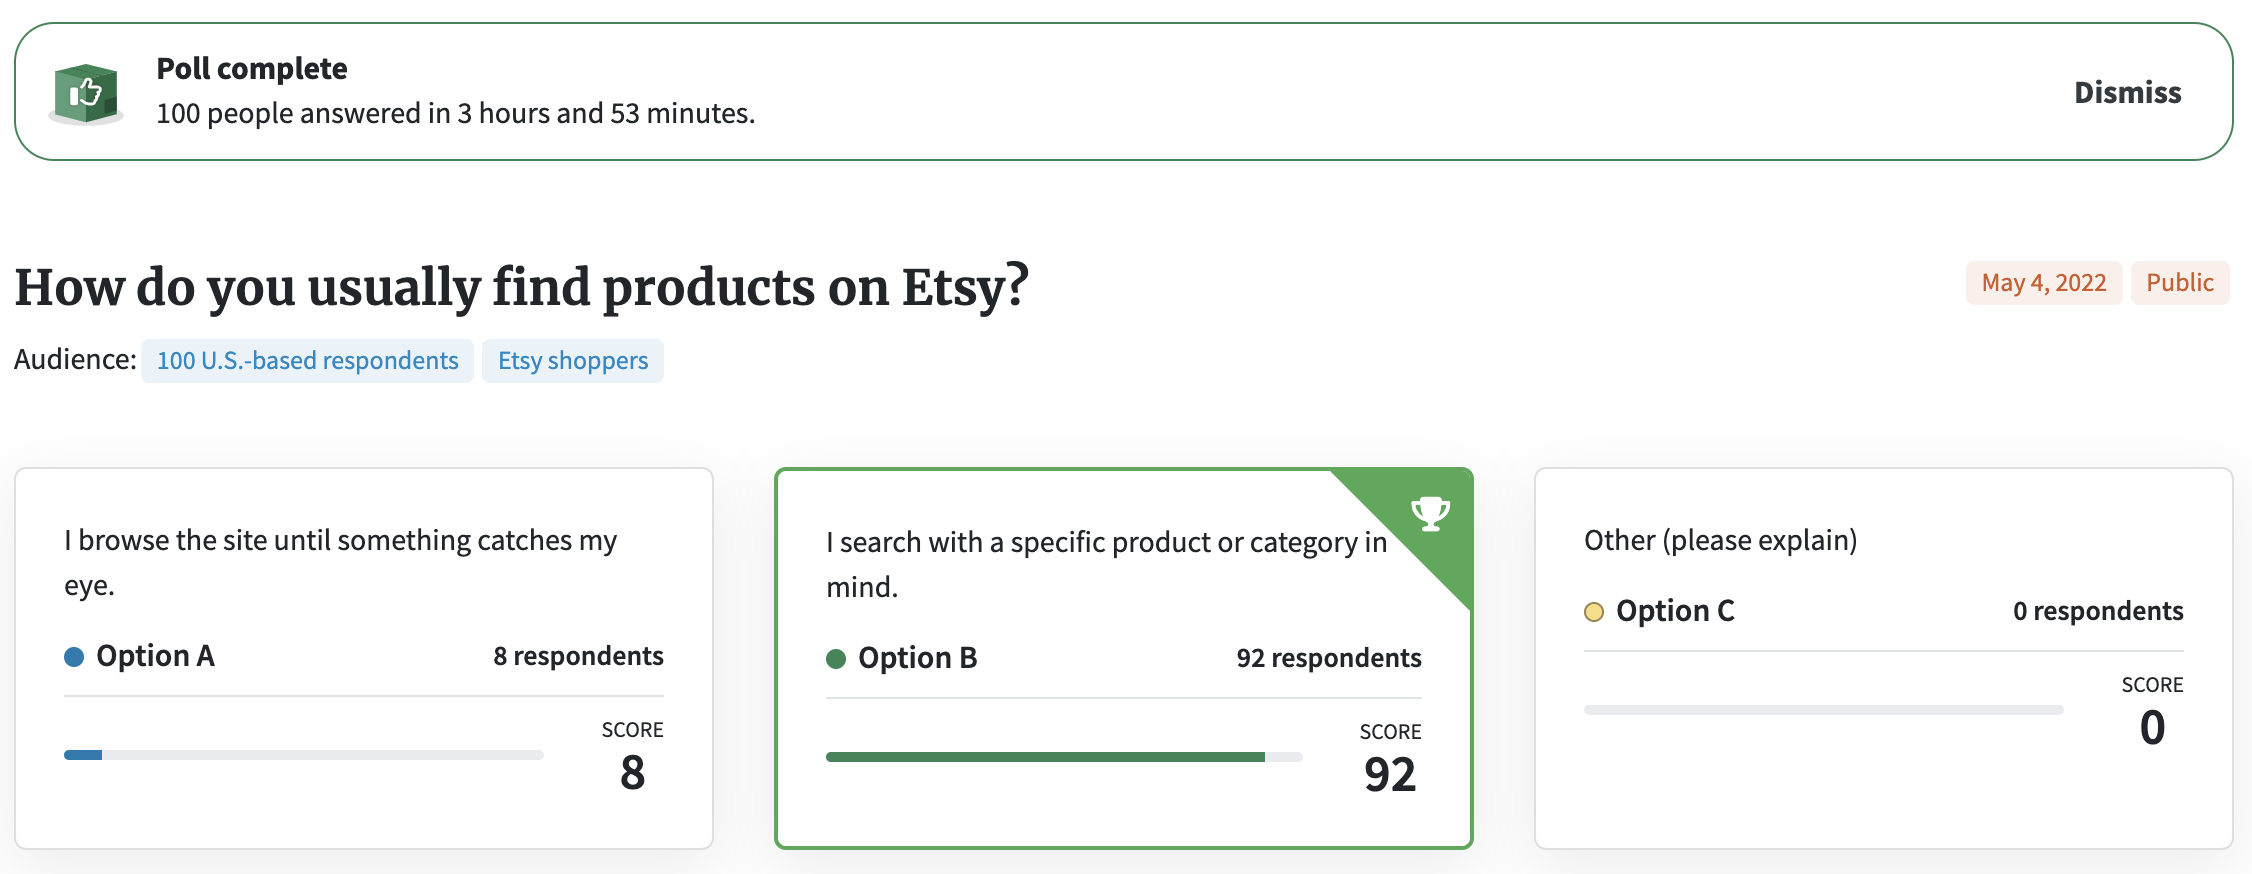 Screenshot of PickFu poll asking Etsy shoppers how they find products on Etsy.